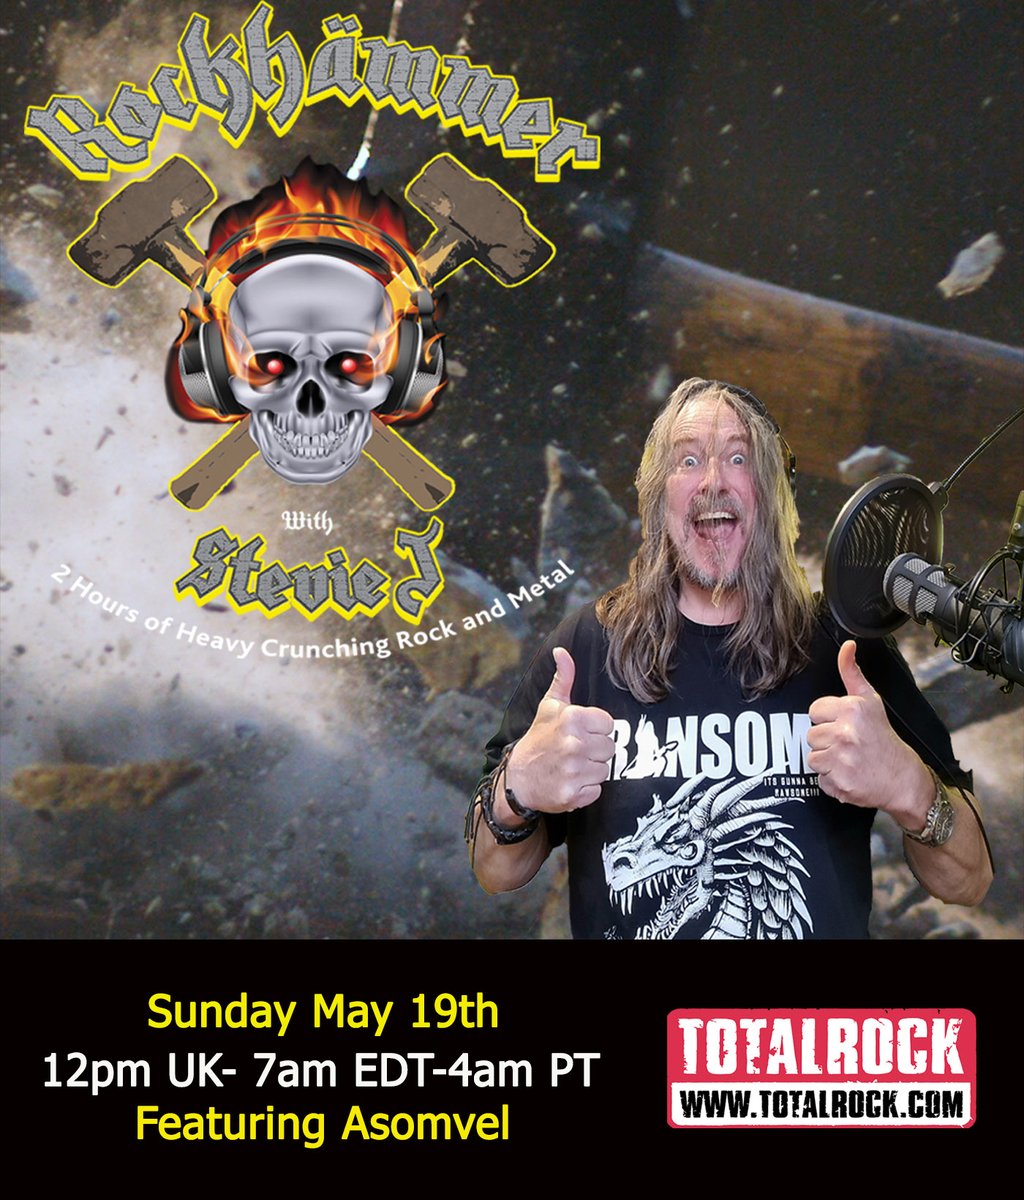 Starting soon on @TotalRockOnline we feature #Asomvel. It's all about keeping Sunday #heavymetal 😎♠♠♠ totalrock.com/popup-player/